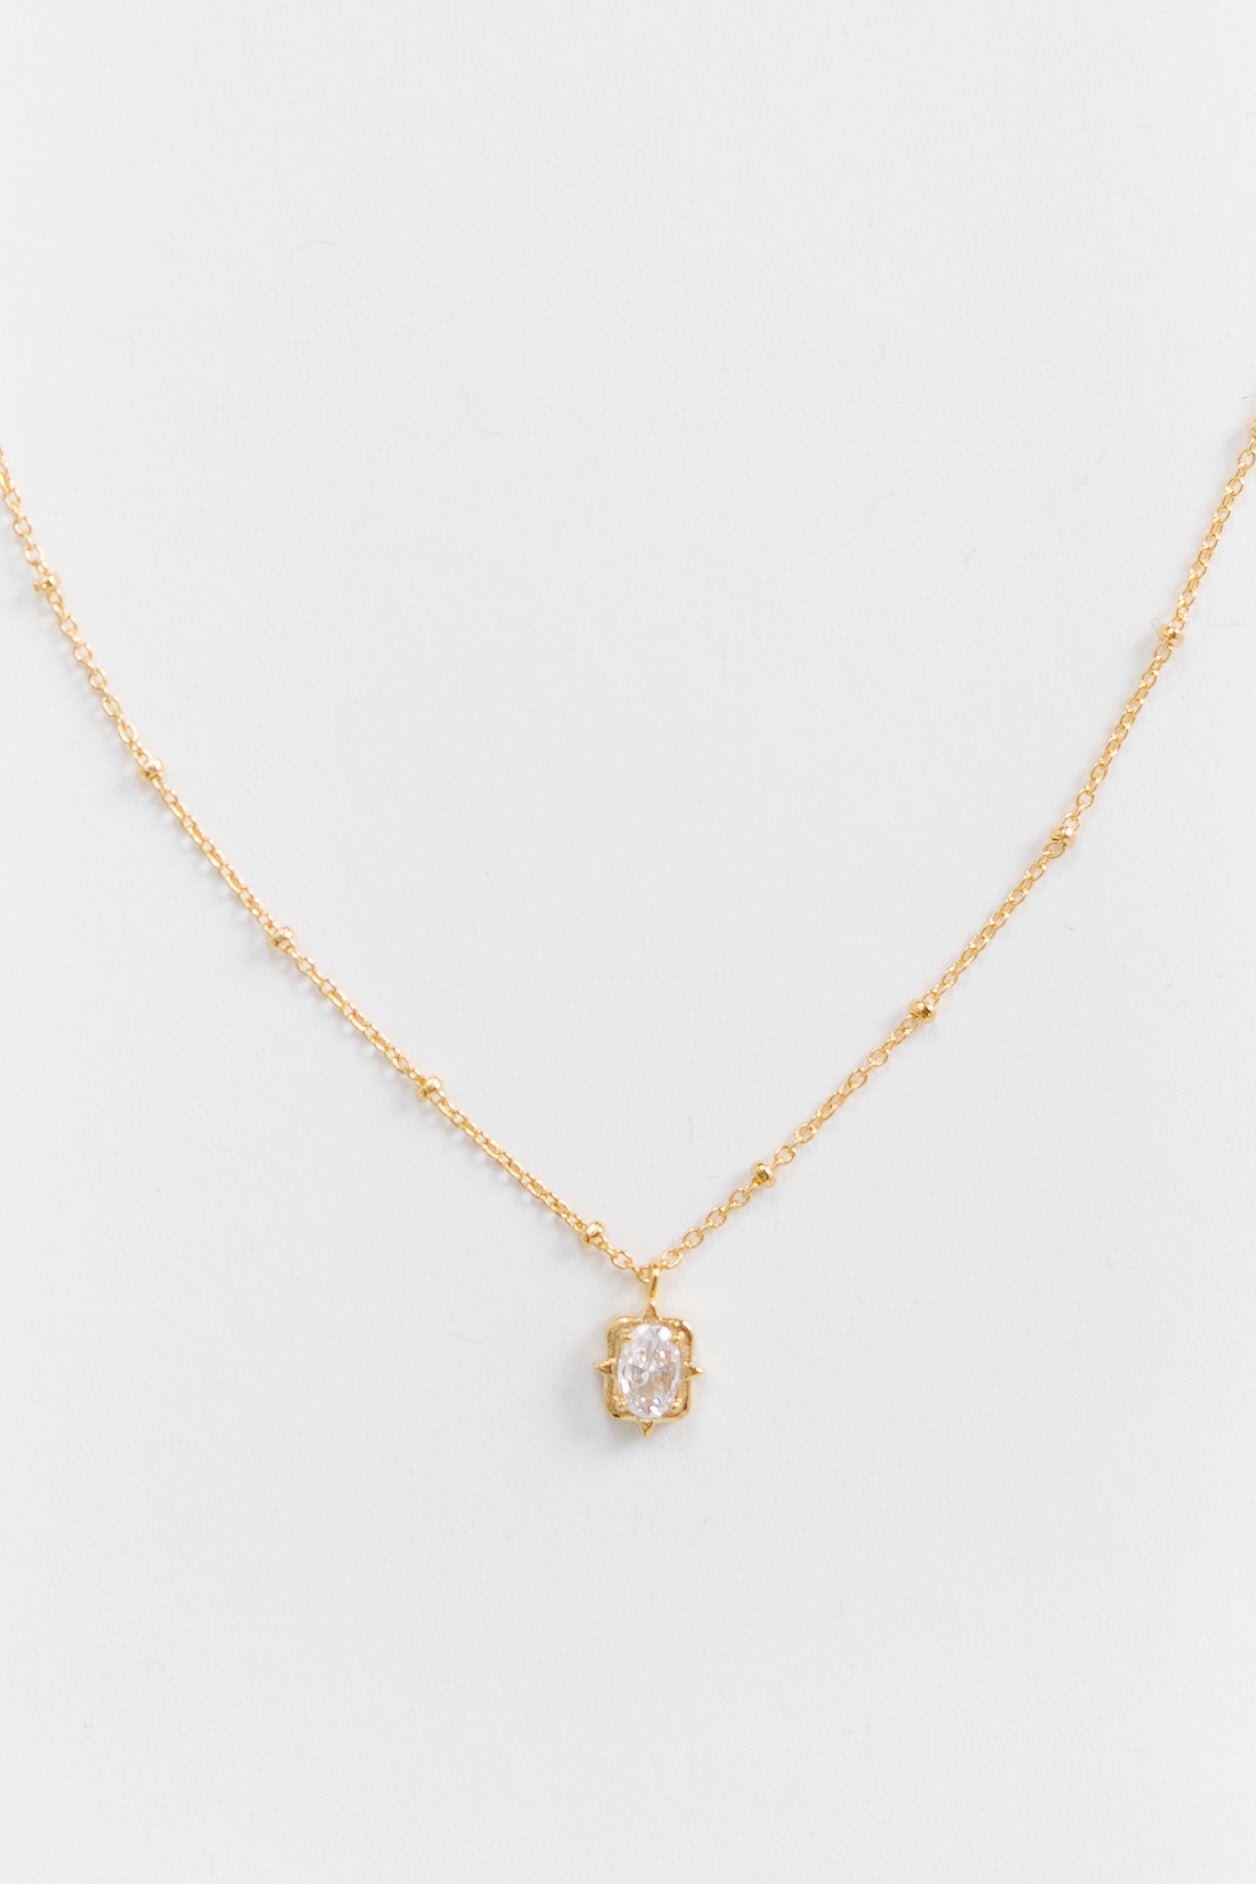 Cove The Reception Stone Necklace WOMEN'S NECKLACE Cove Accessories Gold 16" 